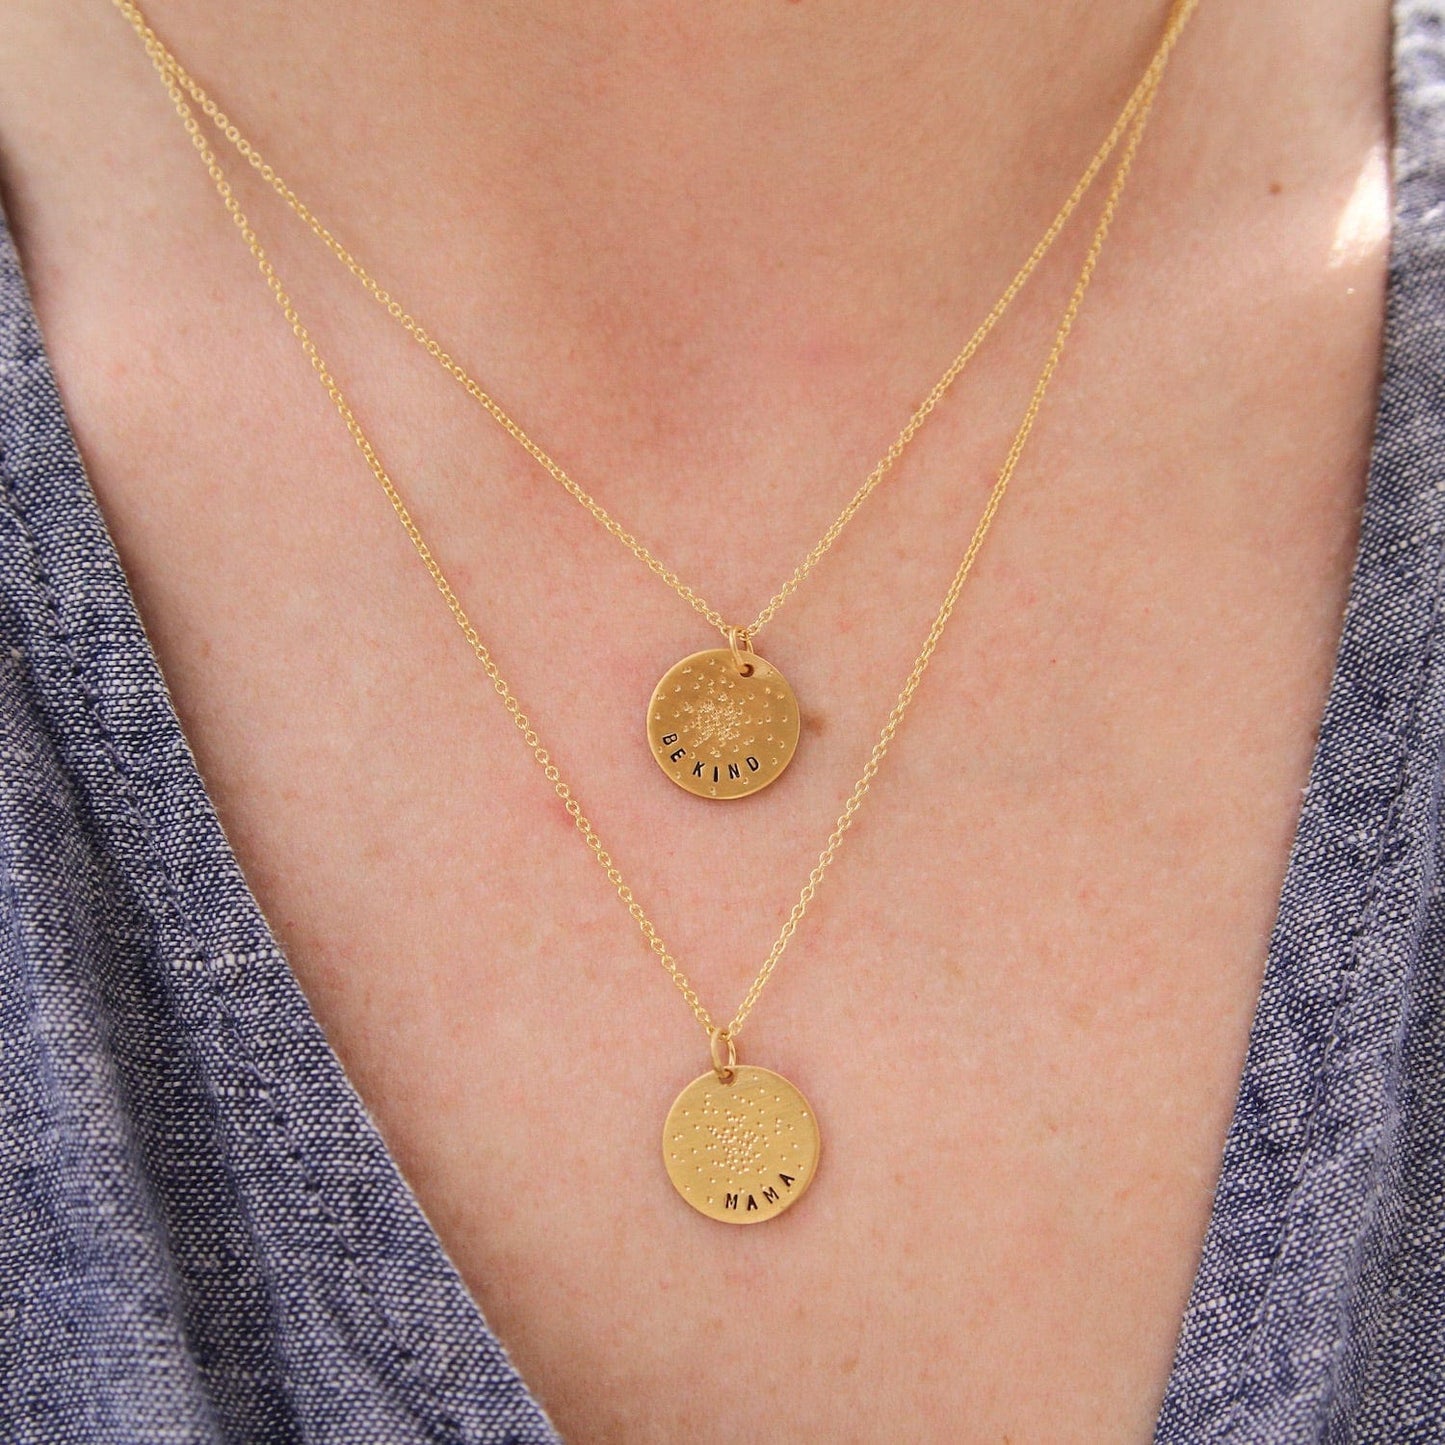 NKL-GPL Diamond Dusted Mini Coin Necklace - "Be Kind"